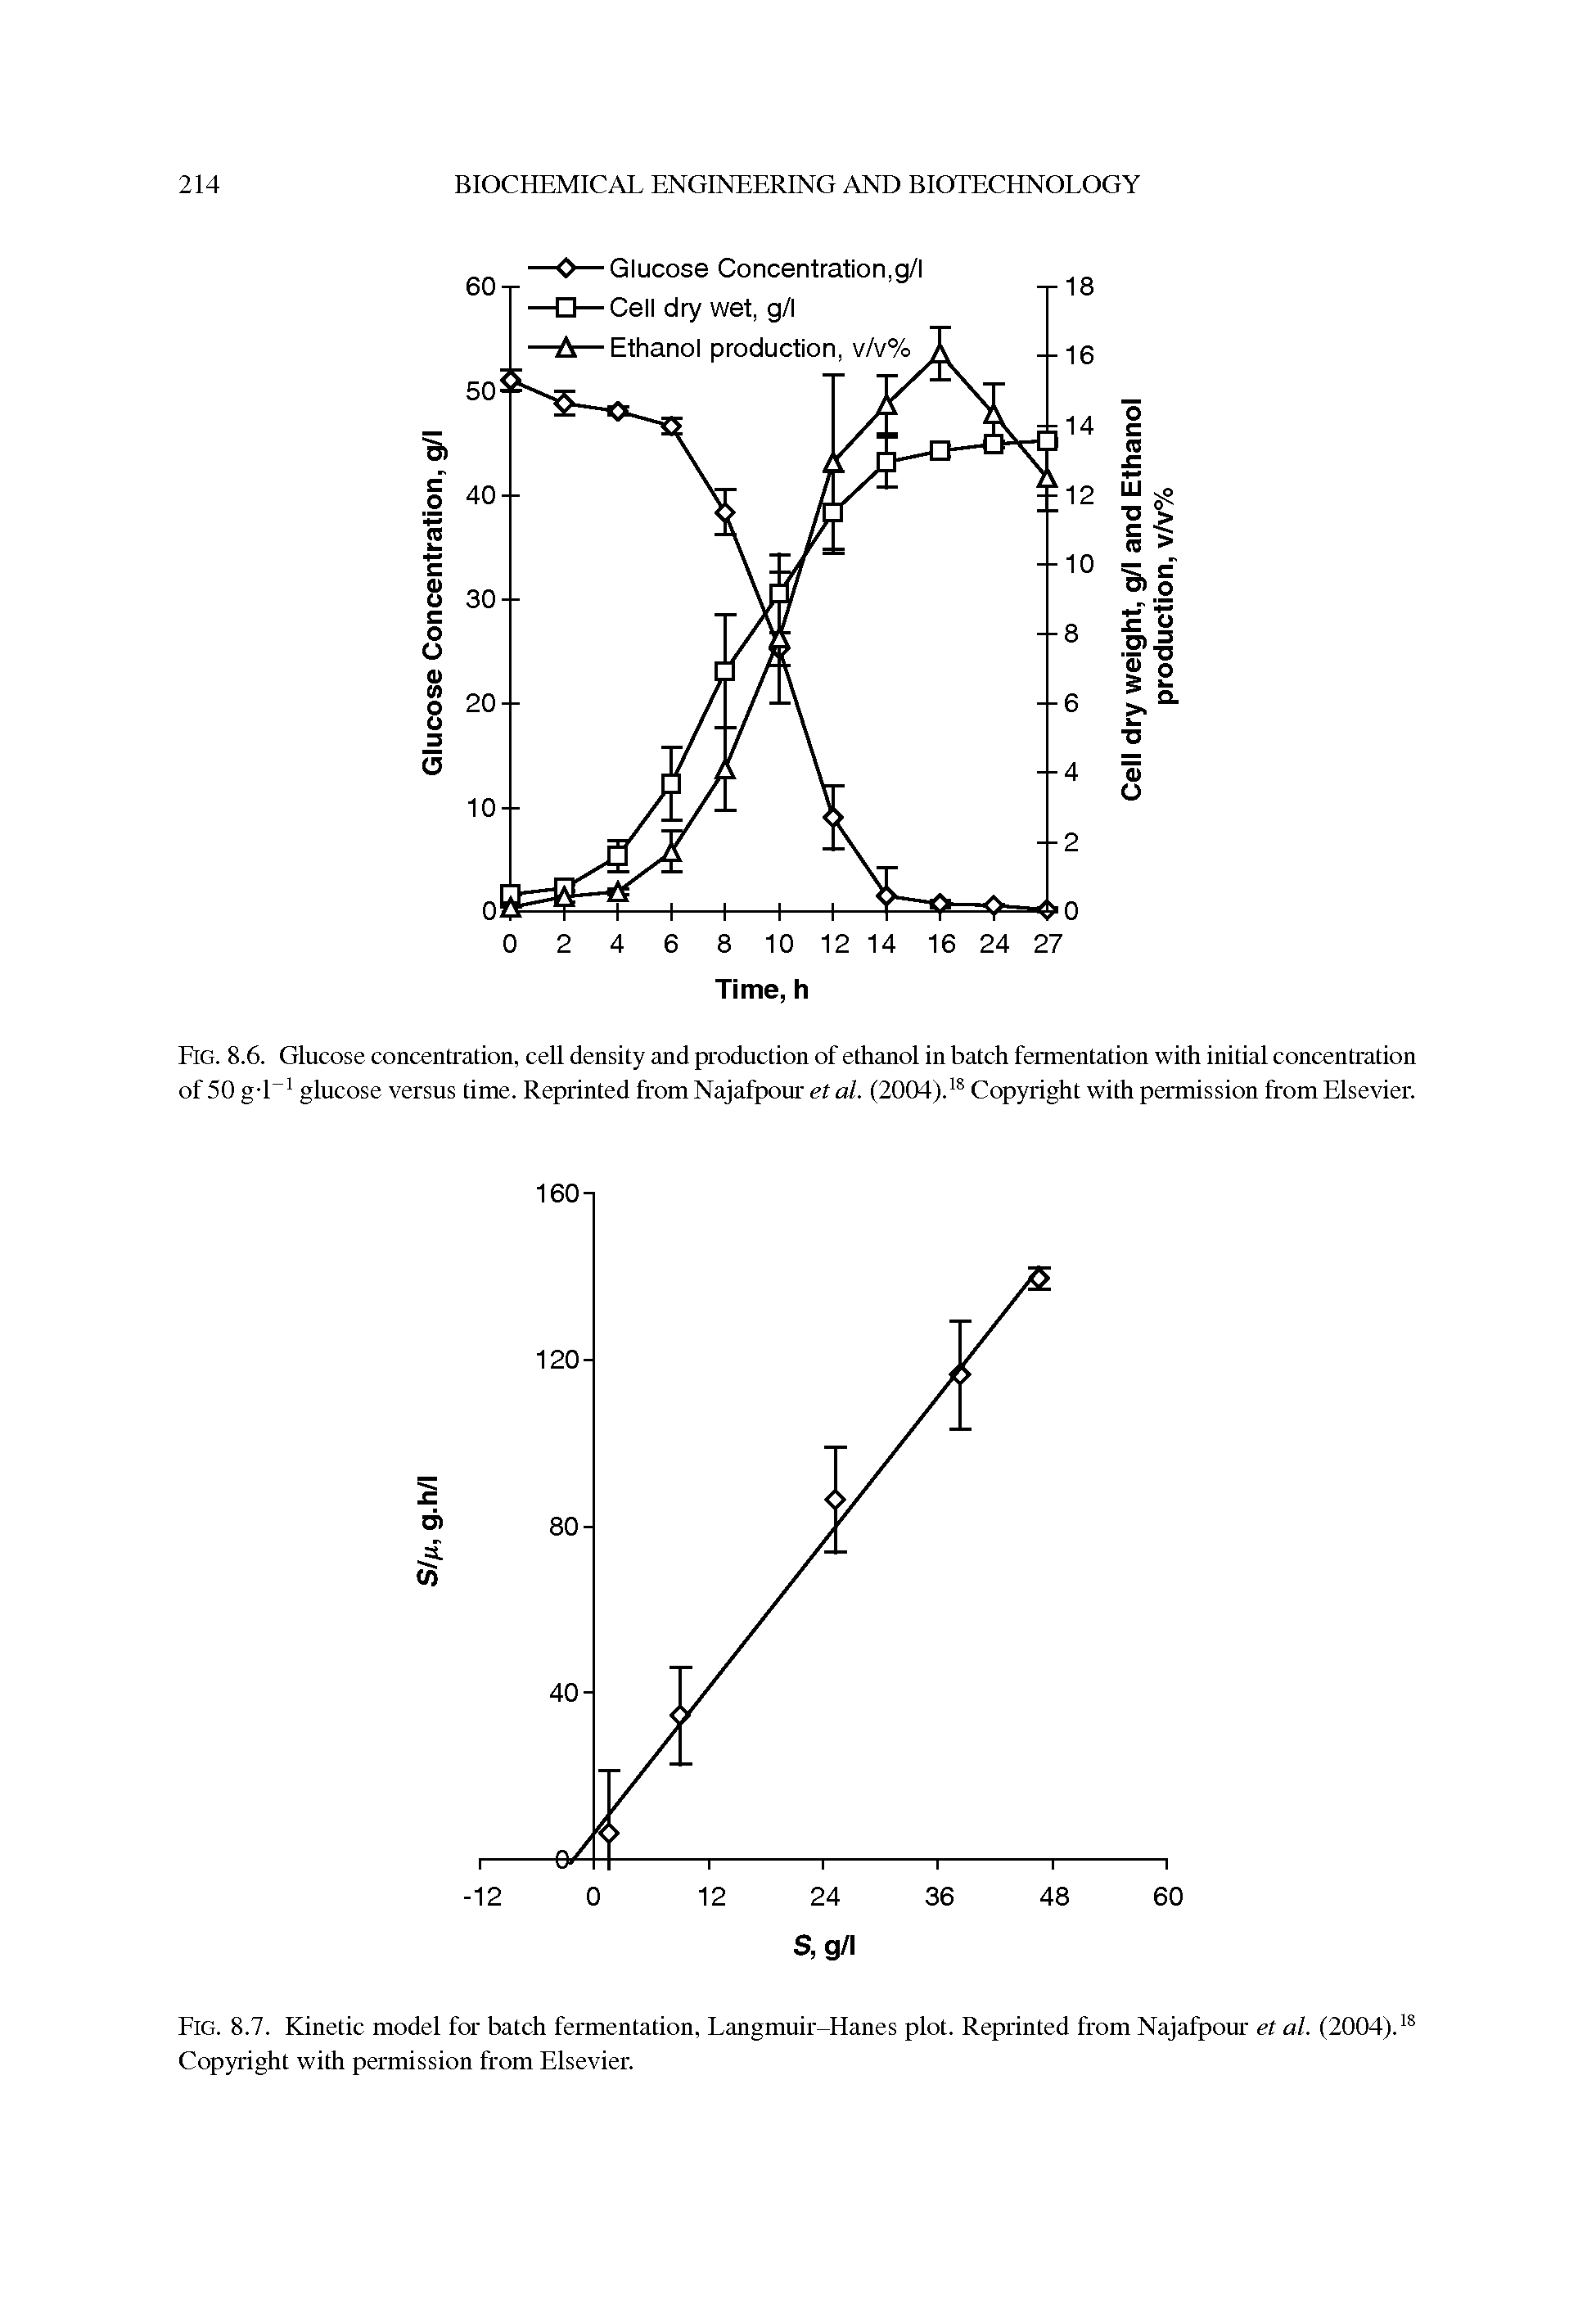 Fig. 8.6. Glucose concentration, cell density and production of ethanol in batch fermentation with initial concentration of 50 g-l 1 glucose versus time. Reprinted from Najafpour et al. (2004).18 Copyright with permission from Elsevier.